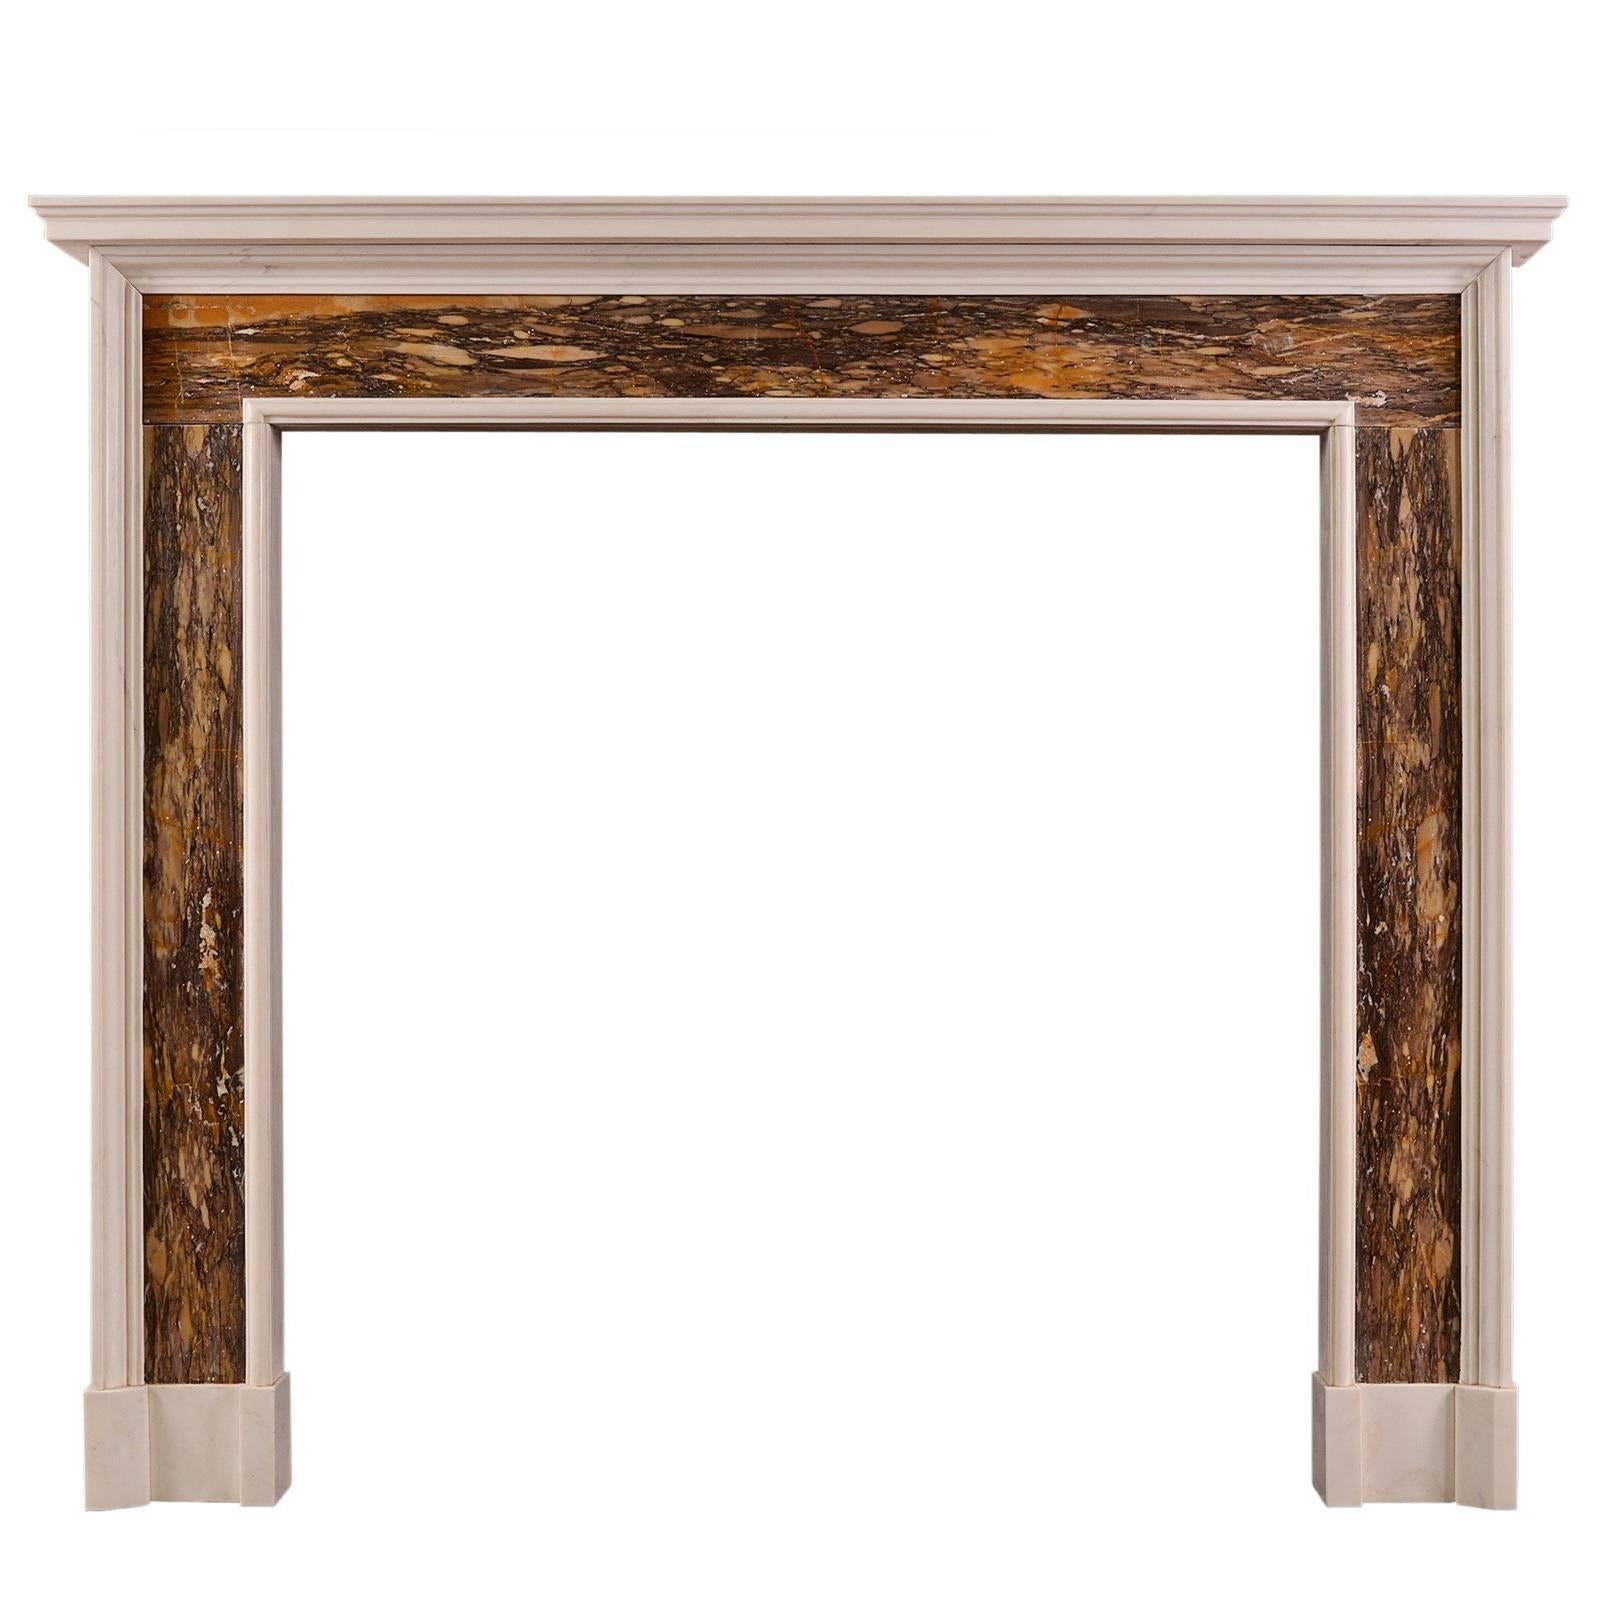 White and Siena Brocatelle Marble Fireplace in the Queen Anne Style